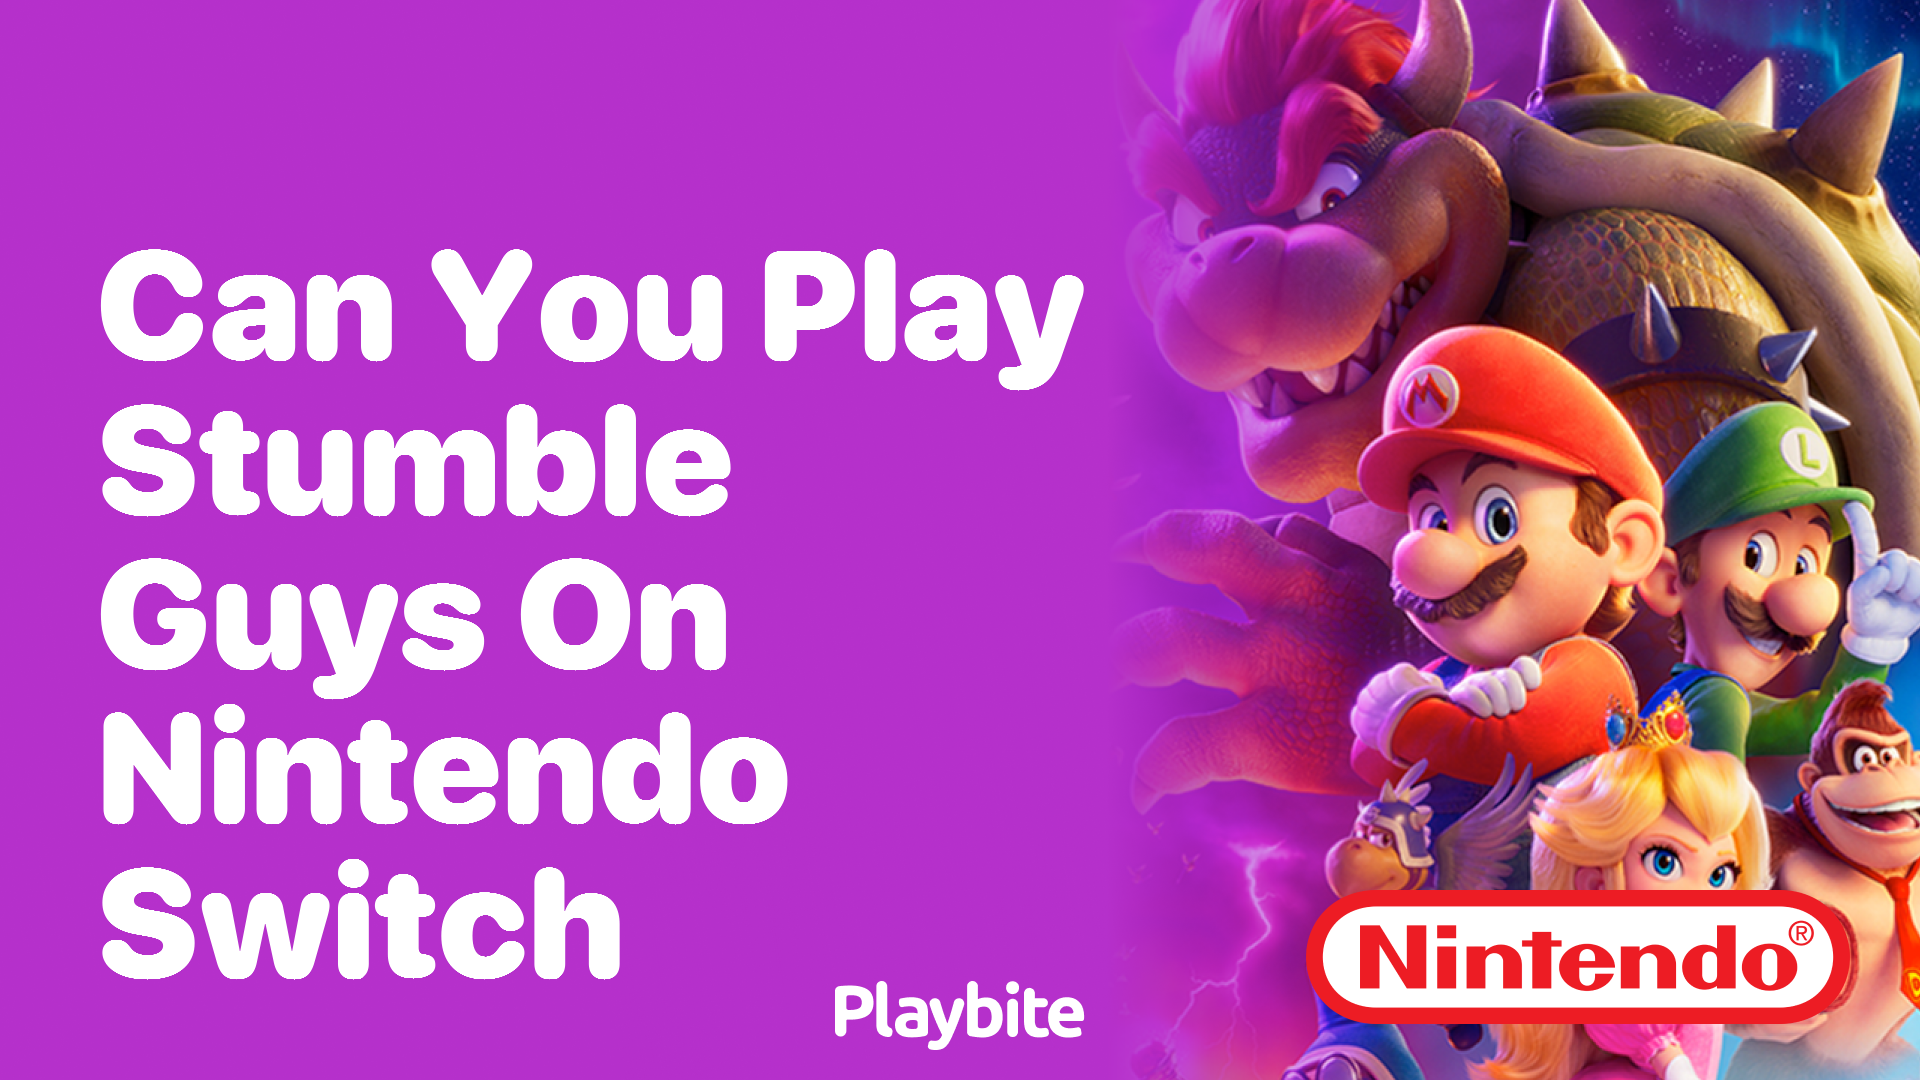 Can You Play Stumble Guys on Nintendo Switch?